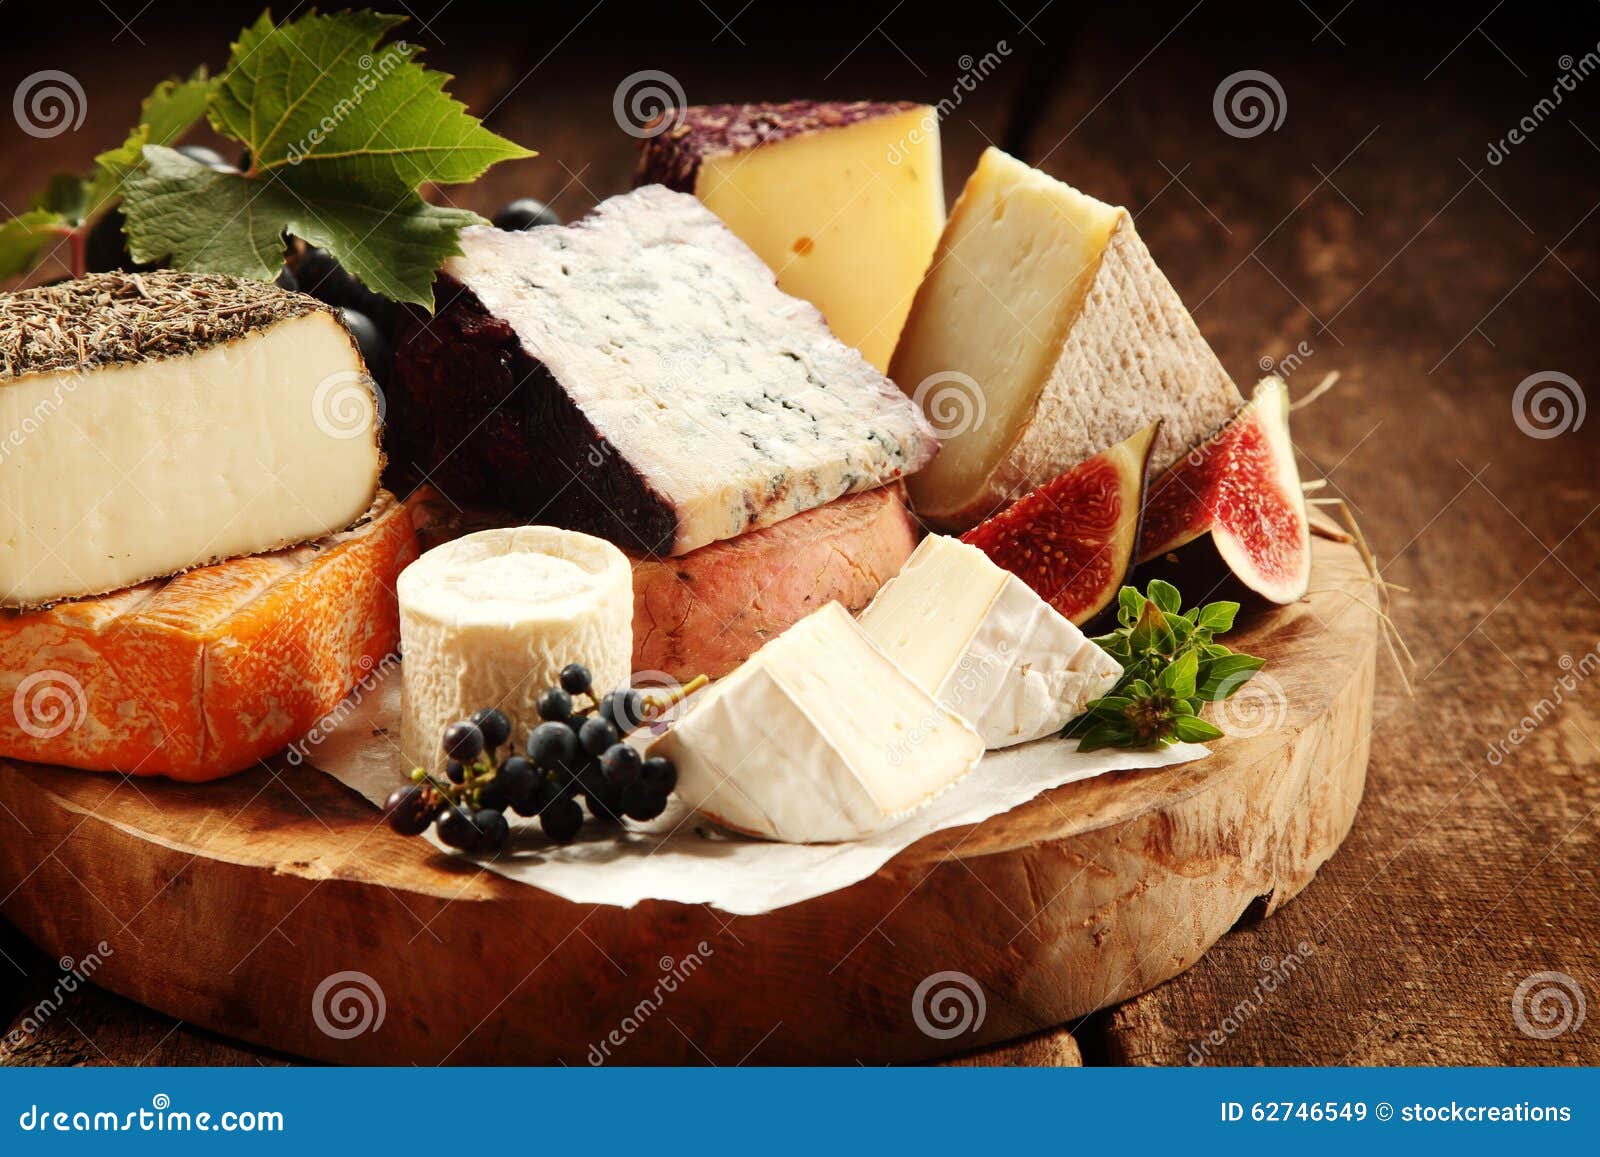 delicious gourmet cheese platter